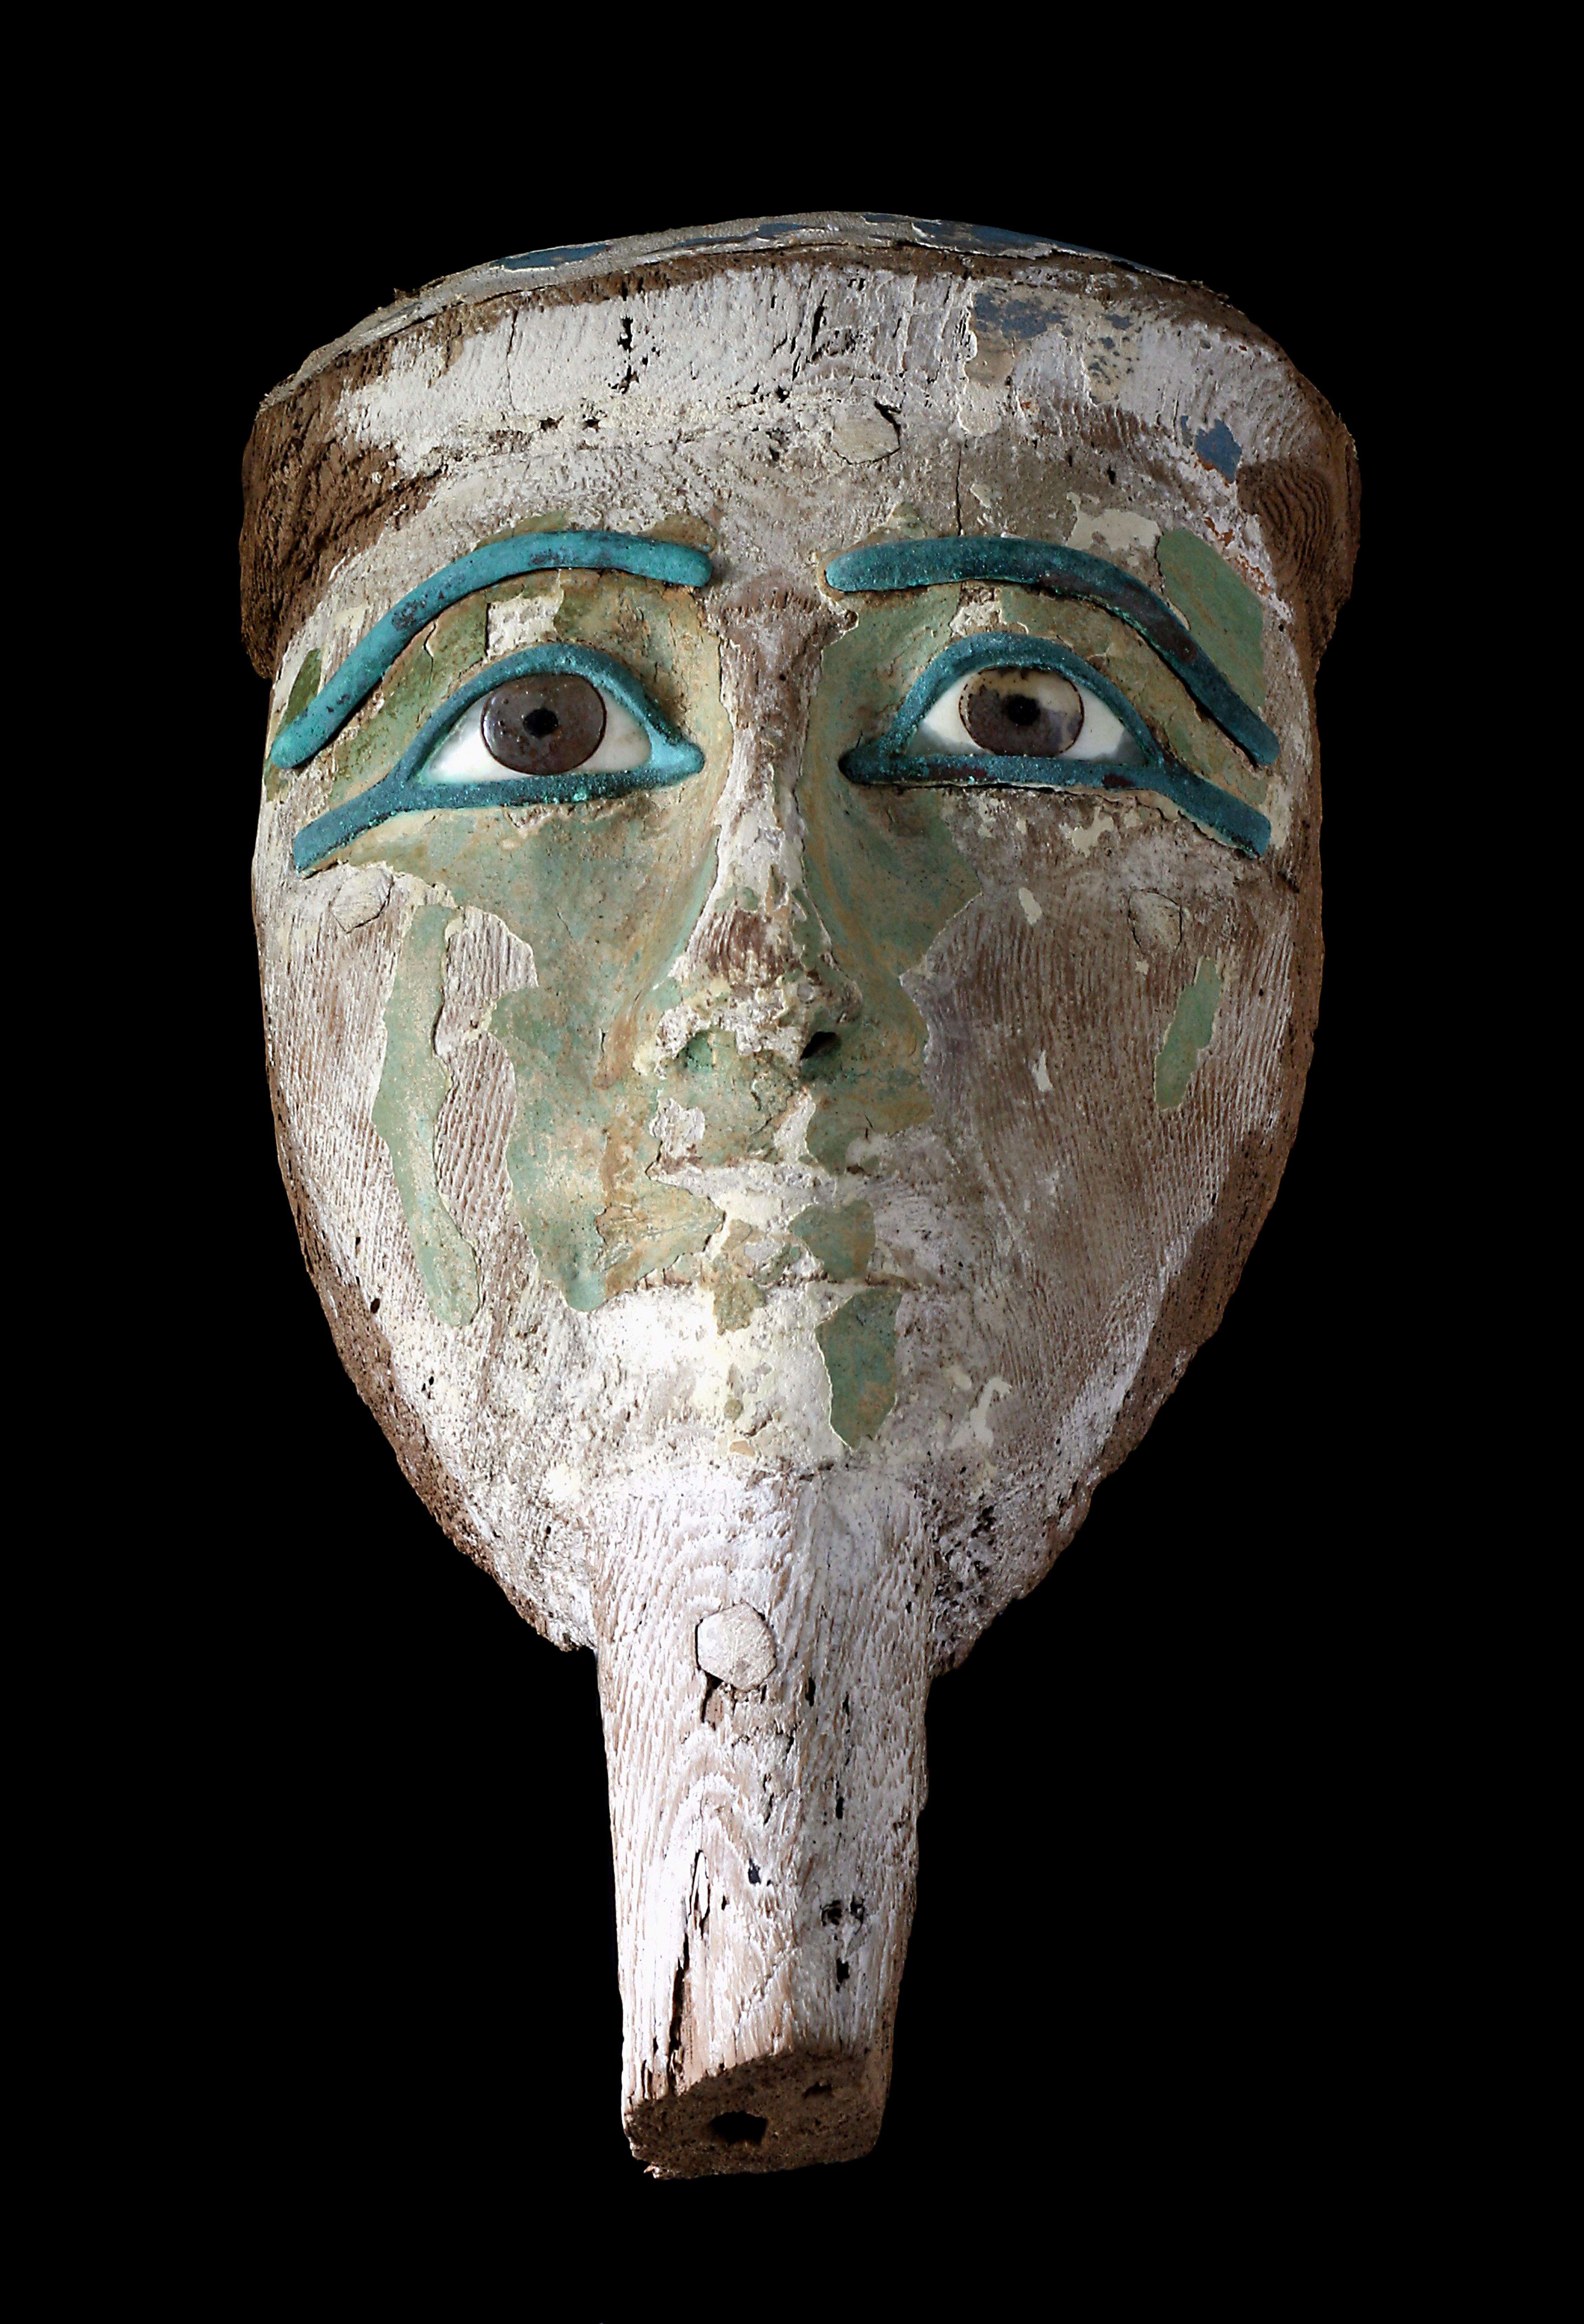 Wooden mask with rock crystal eyes and bronze eyelids/eyebrows
Circa: 711-332 BC
Origin: Egypt.